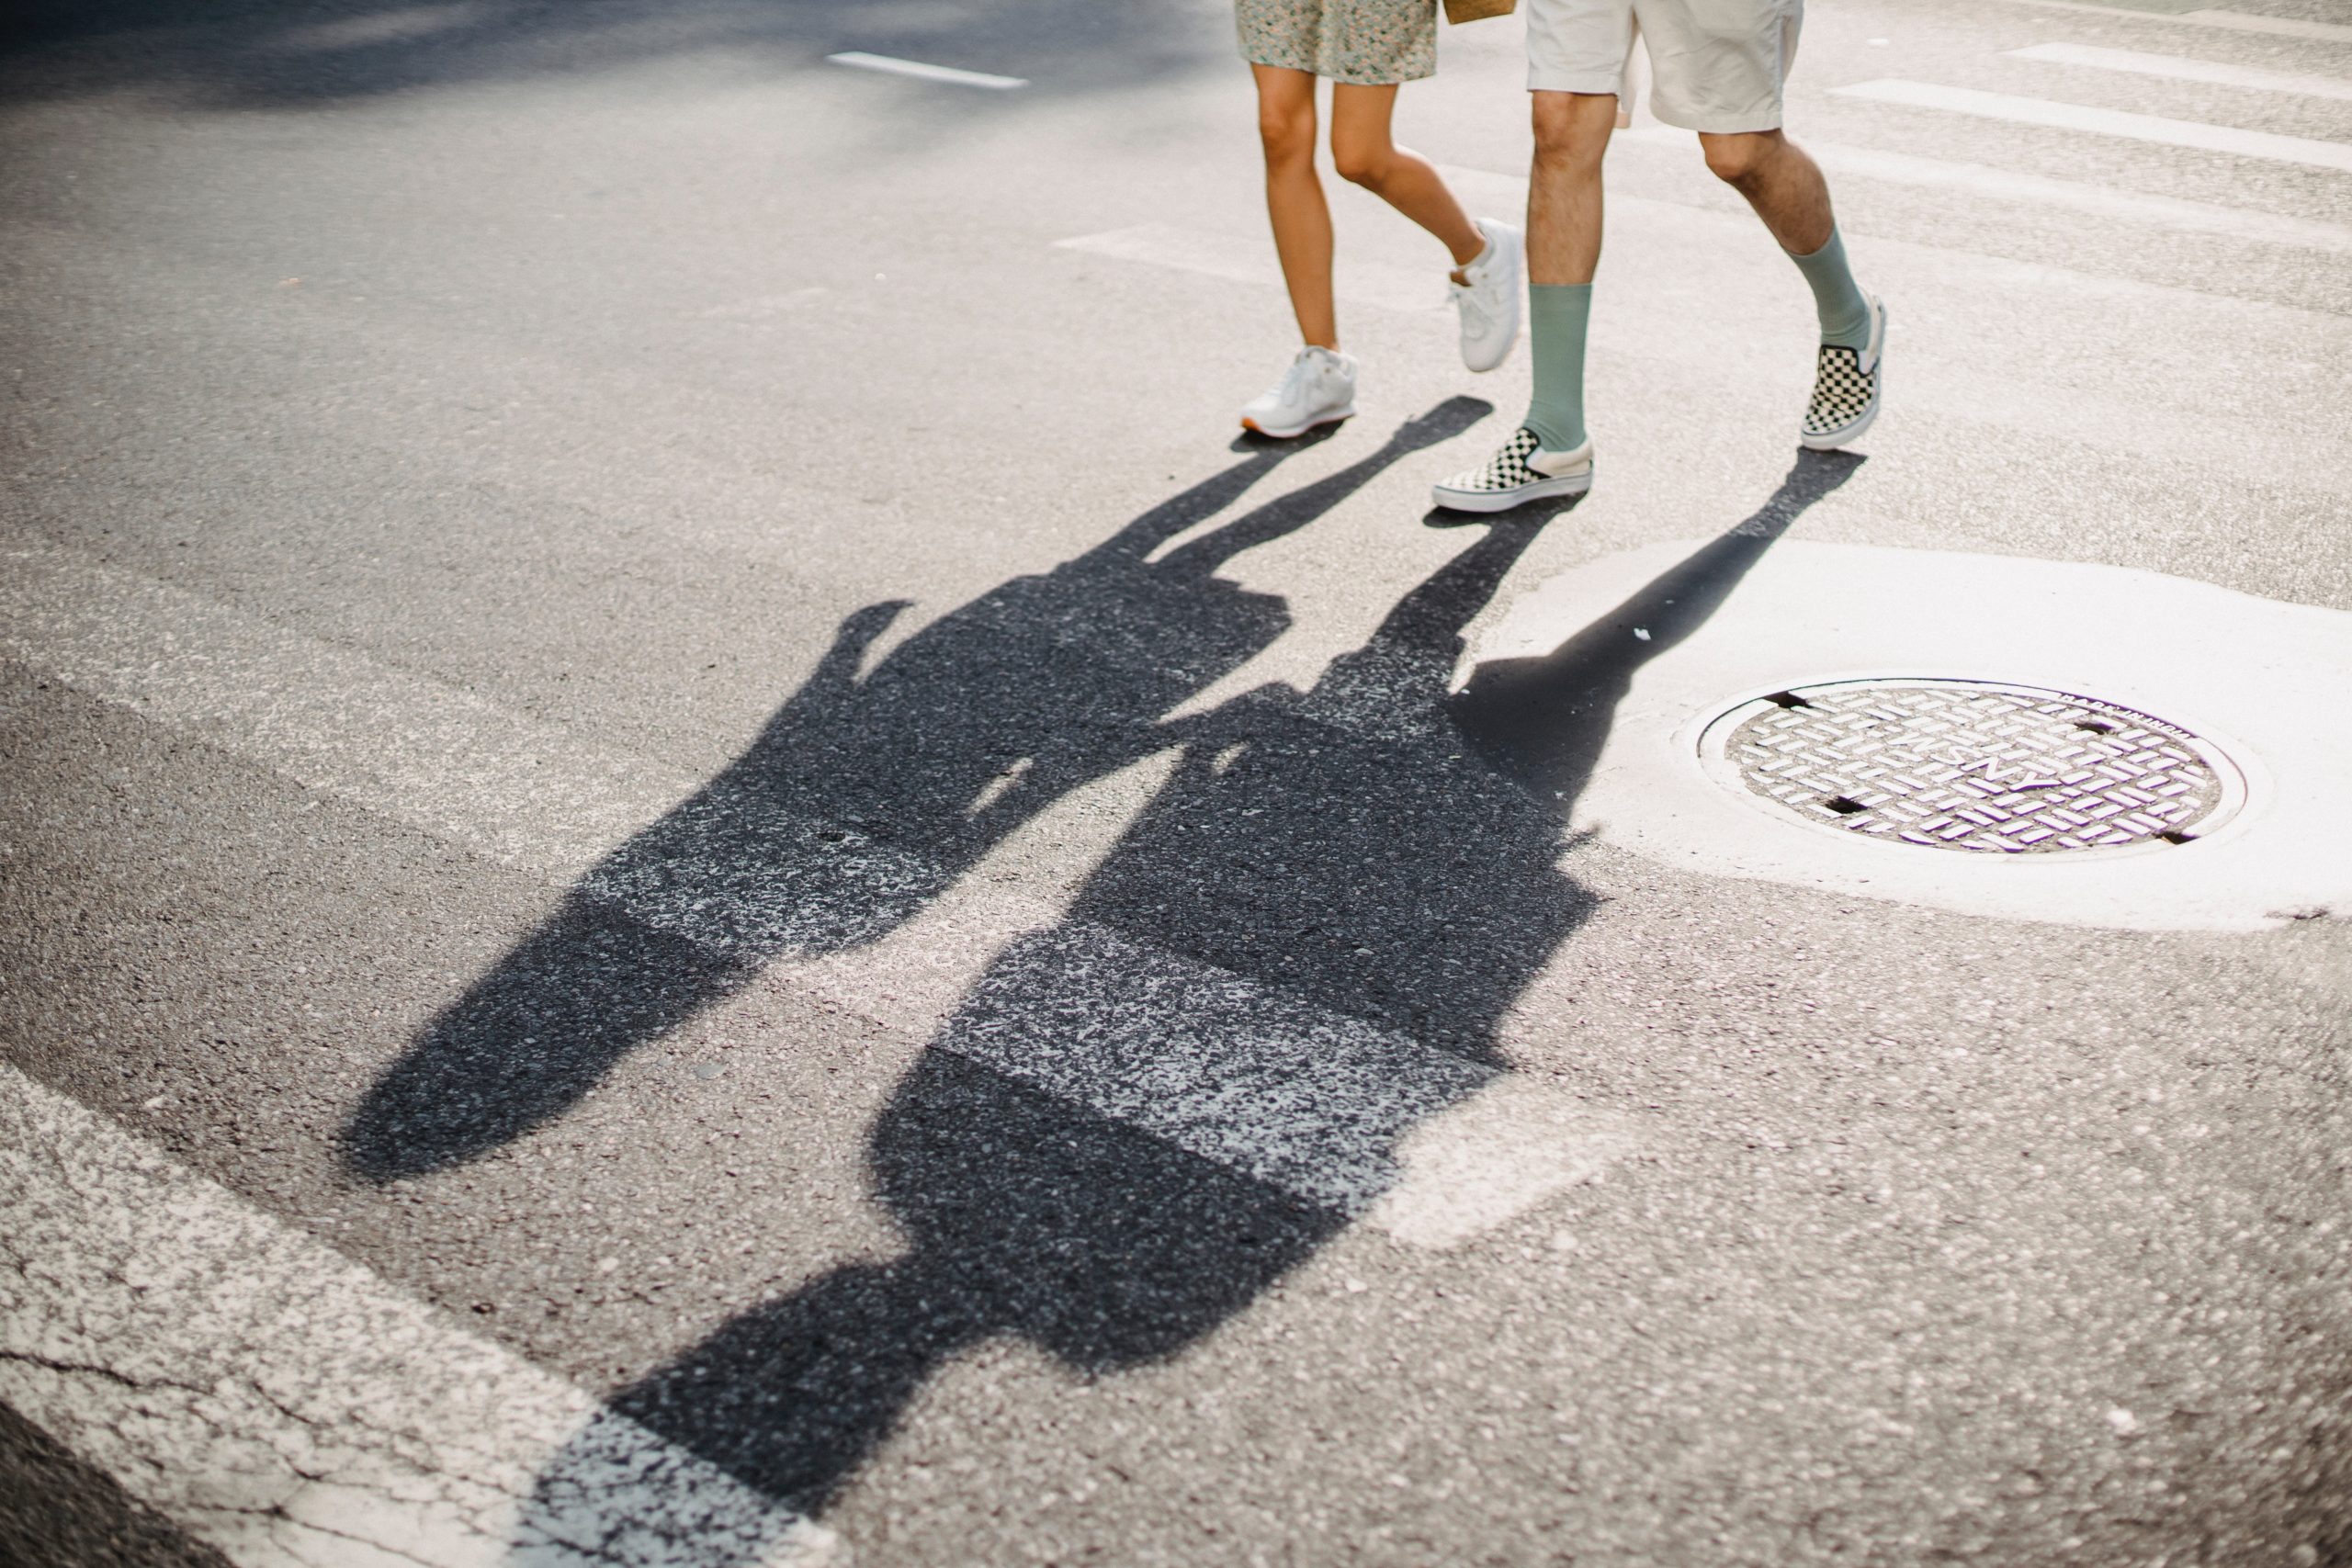 Students at Risk for Florida Pedestrian Accidents